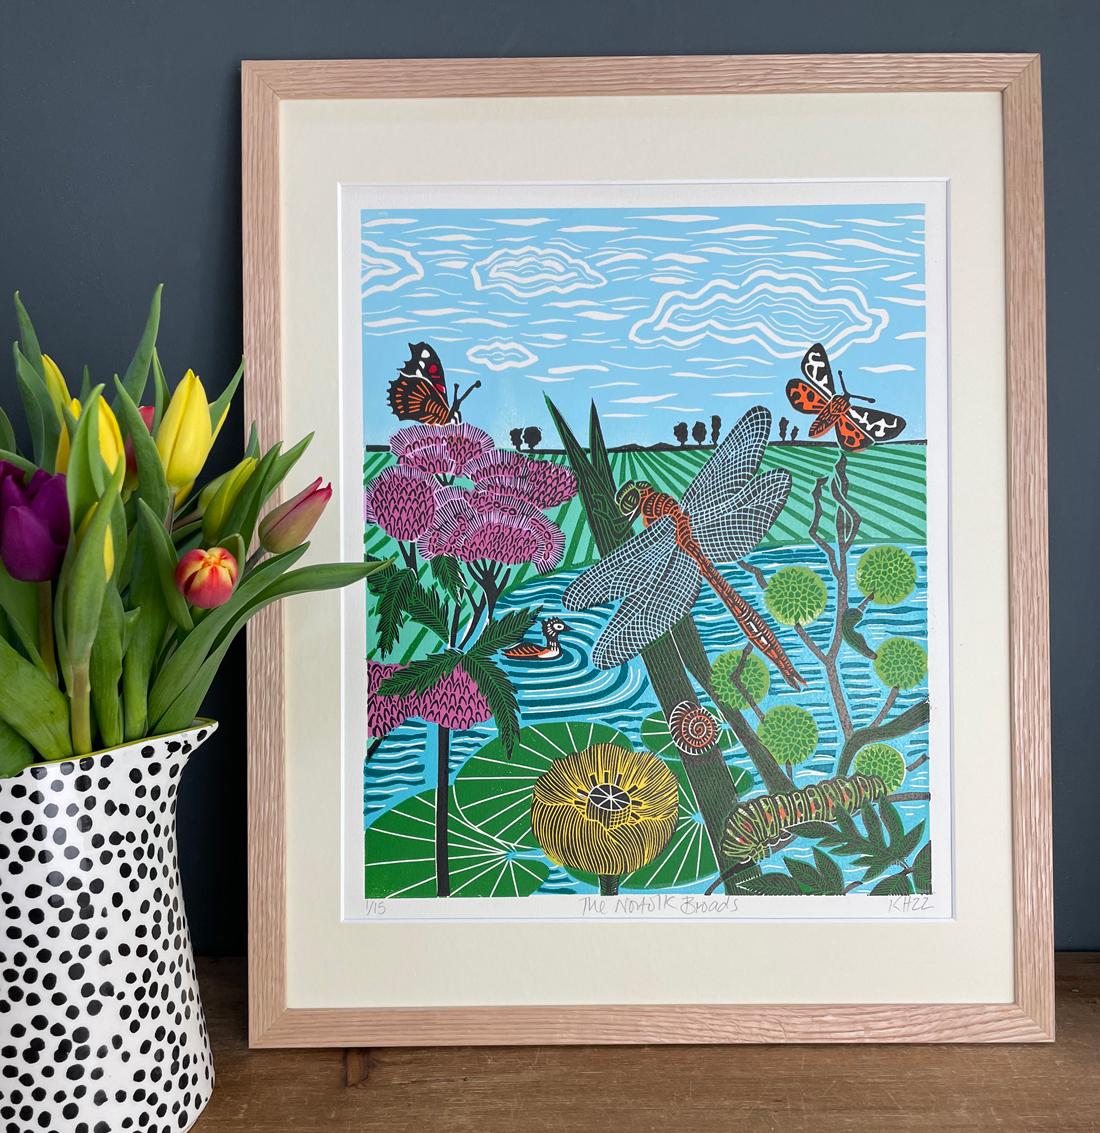 The Norfolk Broads [2022]
 
 This print was created as a commission for the Norfolk Broads Authority to feature on the cover of their 2022 Guide. I was asked to create a print that showcases the rare species that are indigenous to the Norfolk